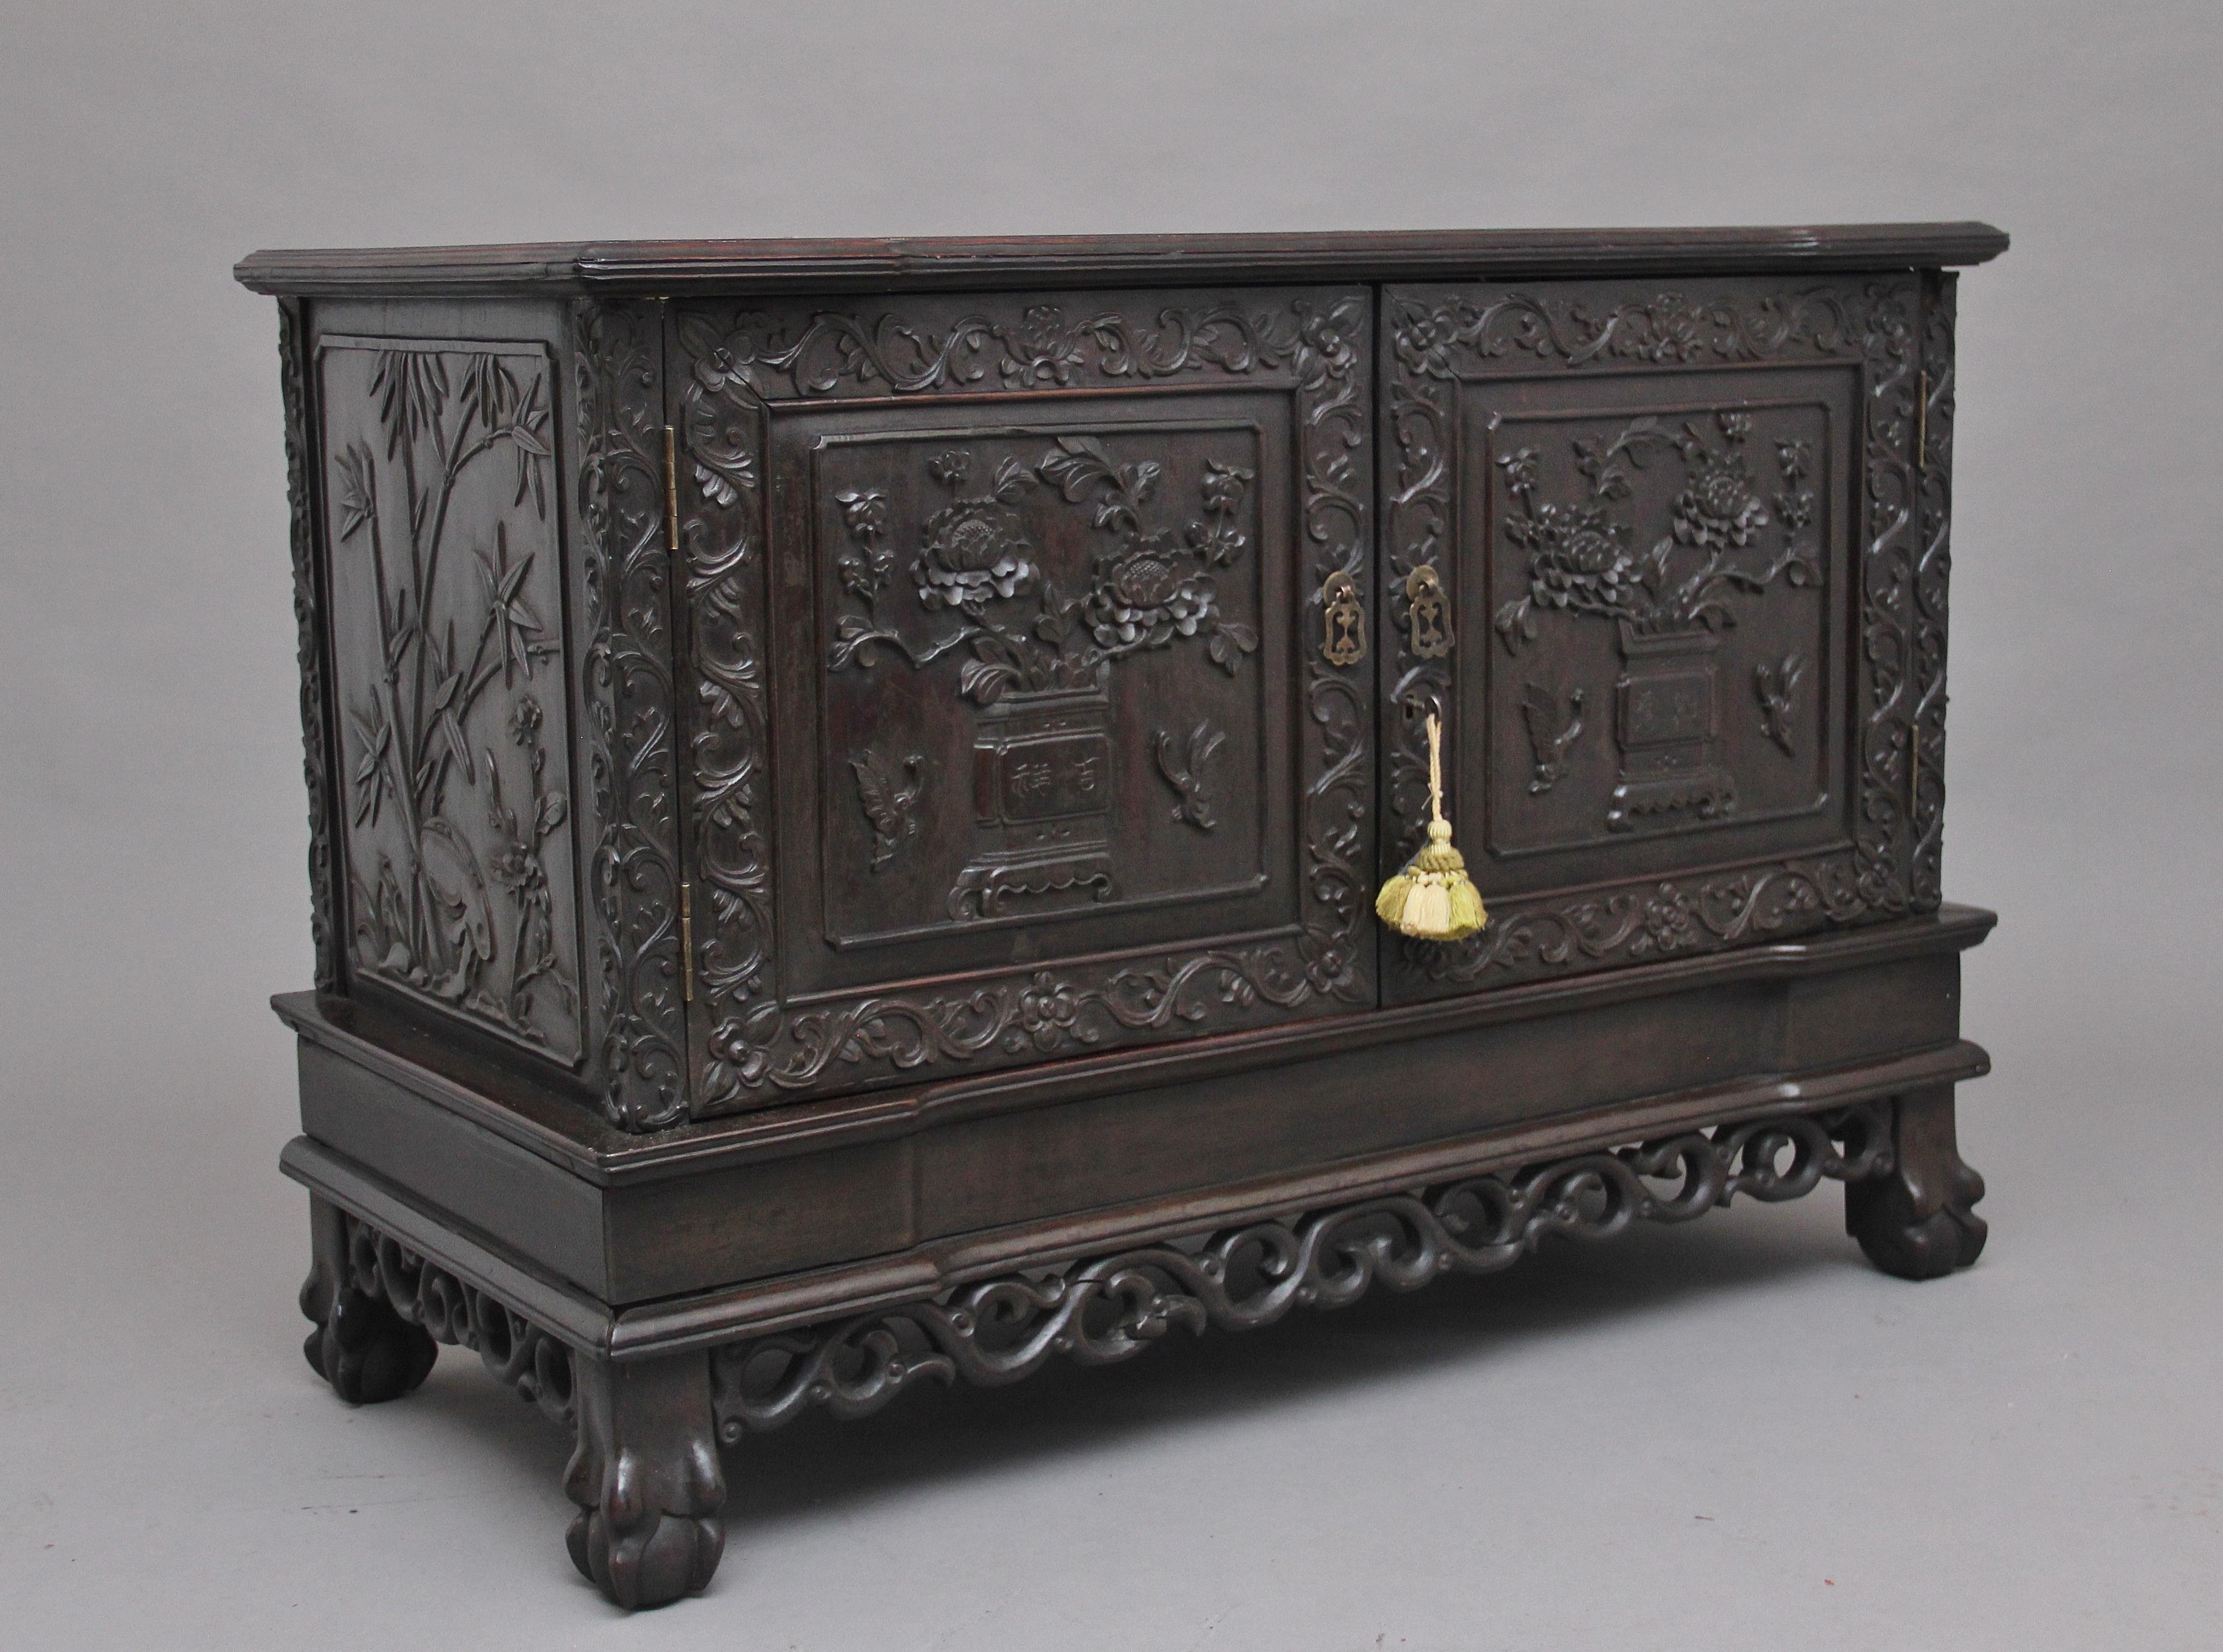 19th century Chinese hongmu hardwood carved cabinet, the shaped and moulded top above two cupboard doors opening to reveal a single fixed shelf inside, the door fronts profusely carved all-over with emerging foliage and vines, as with the sides of